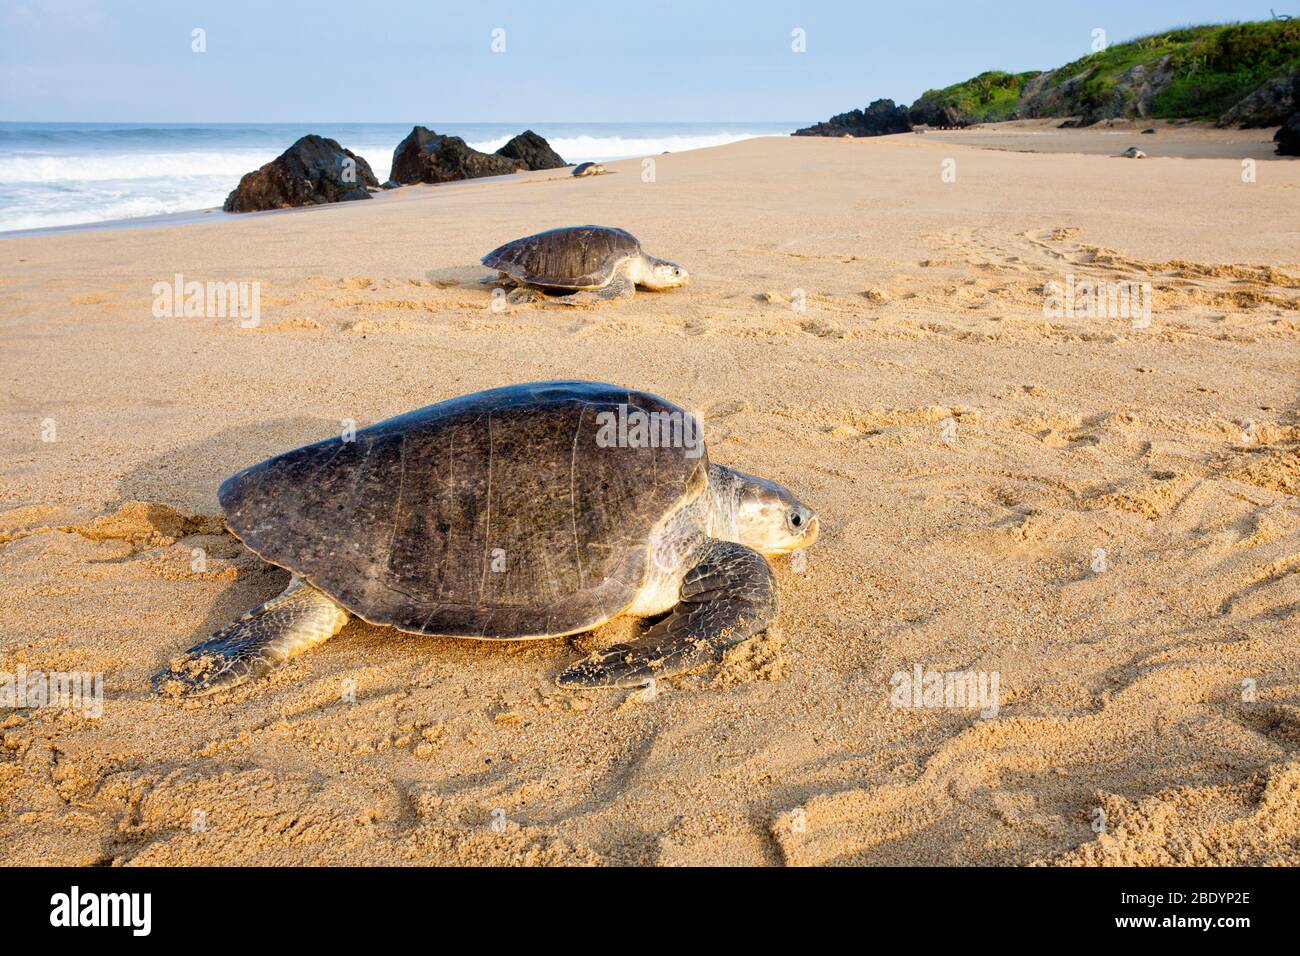 Olive Ridley sea turtles arrive to lay eggs on the Ixtapilla Beach in Michoacan, Mexico. Stock Photo